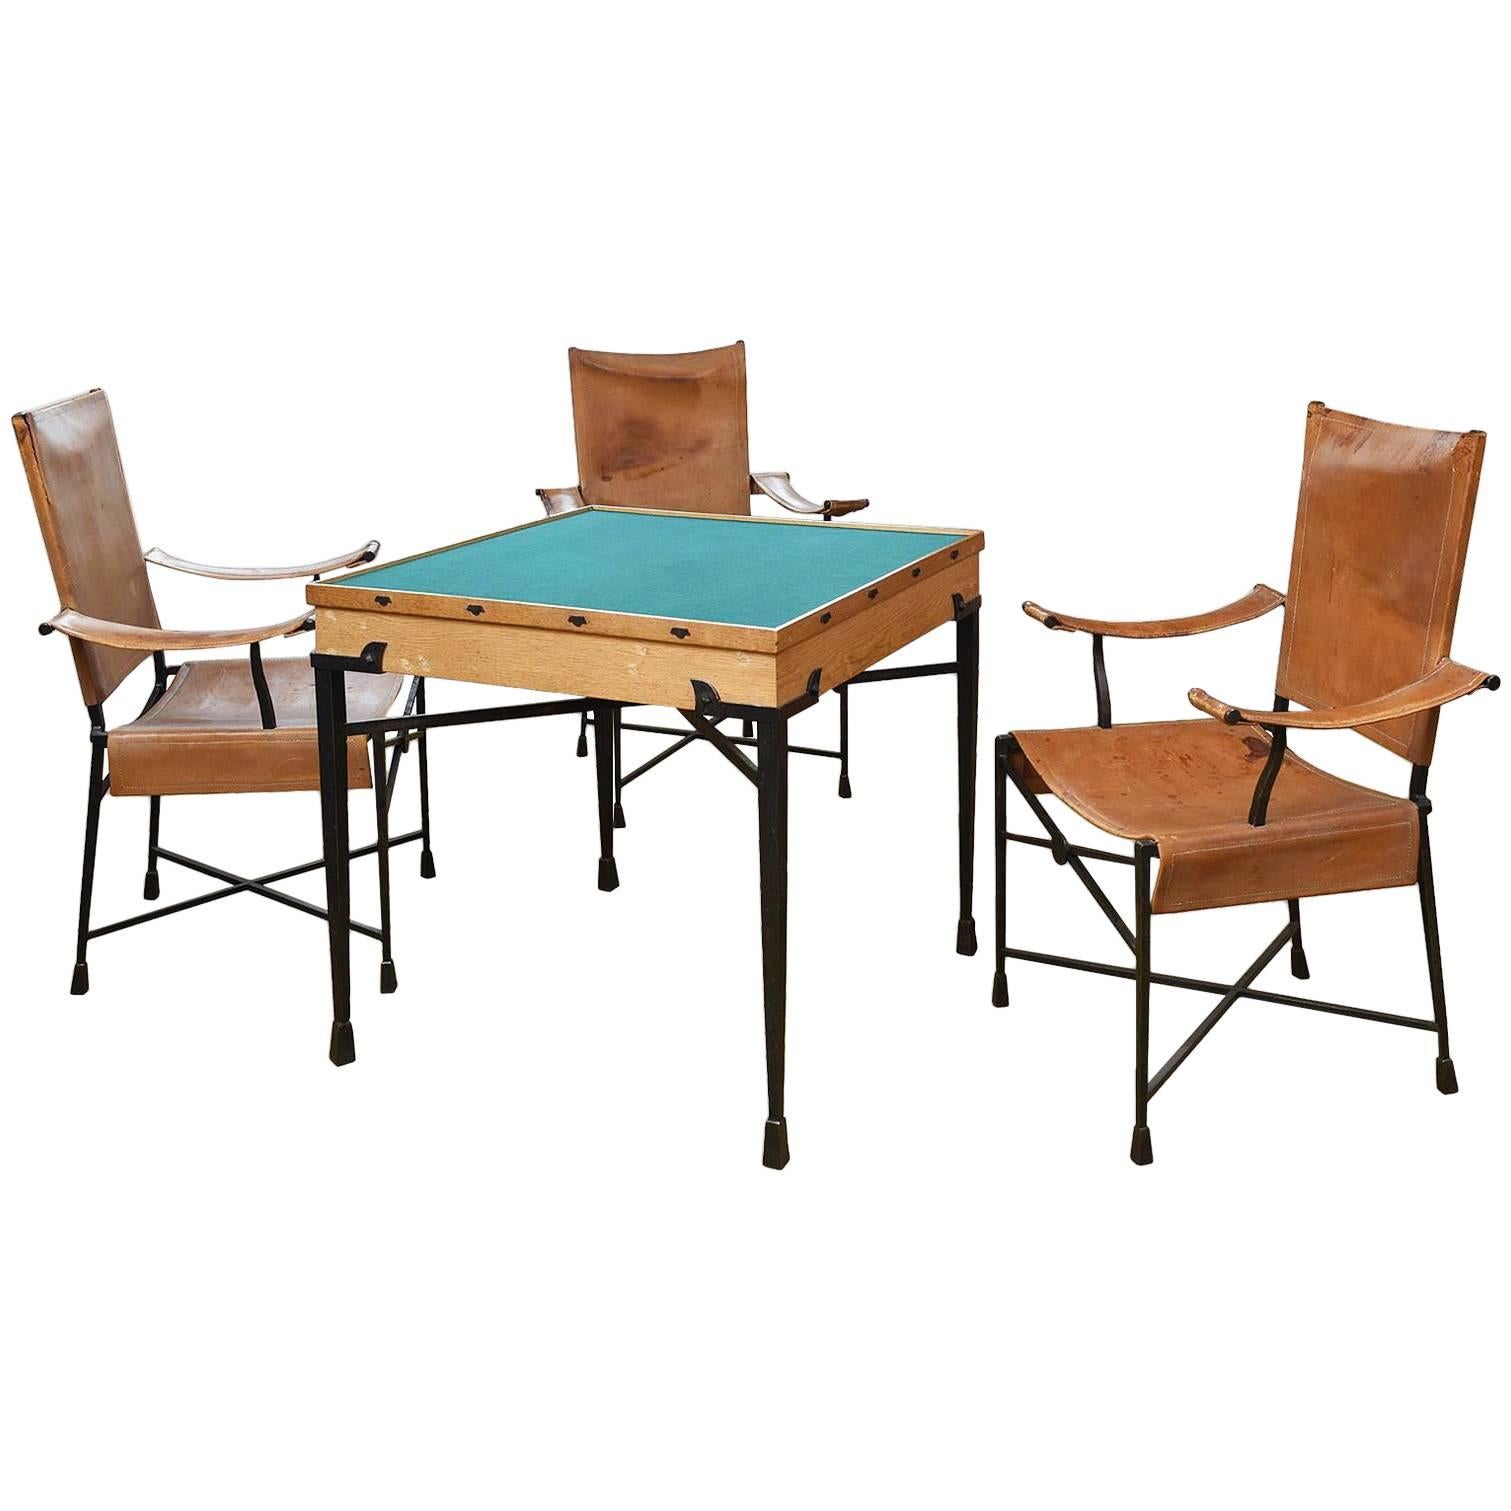 Etienne Kohlmann Exceptional Game Table and Chairs 